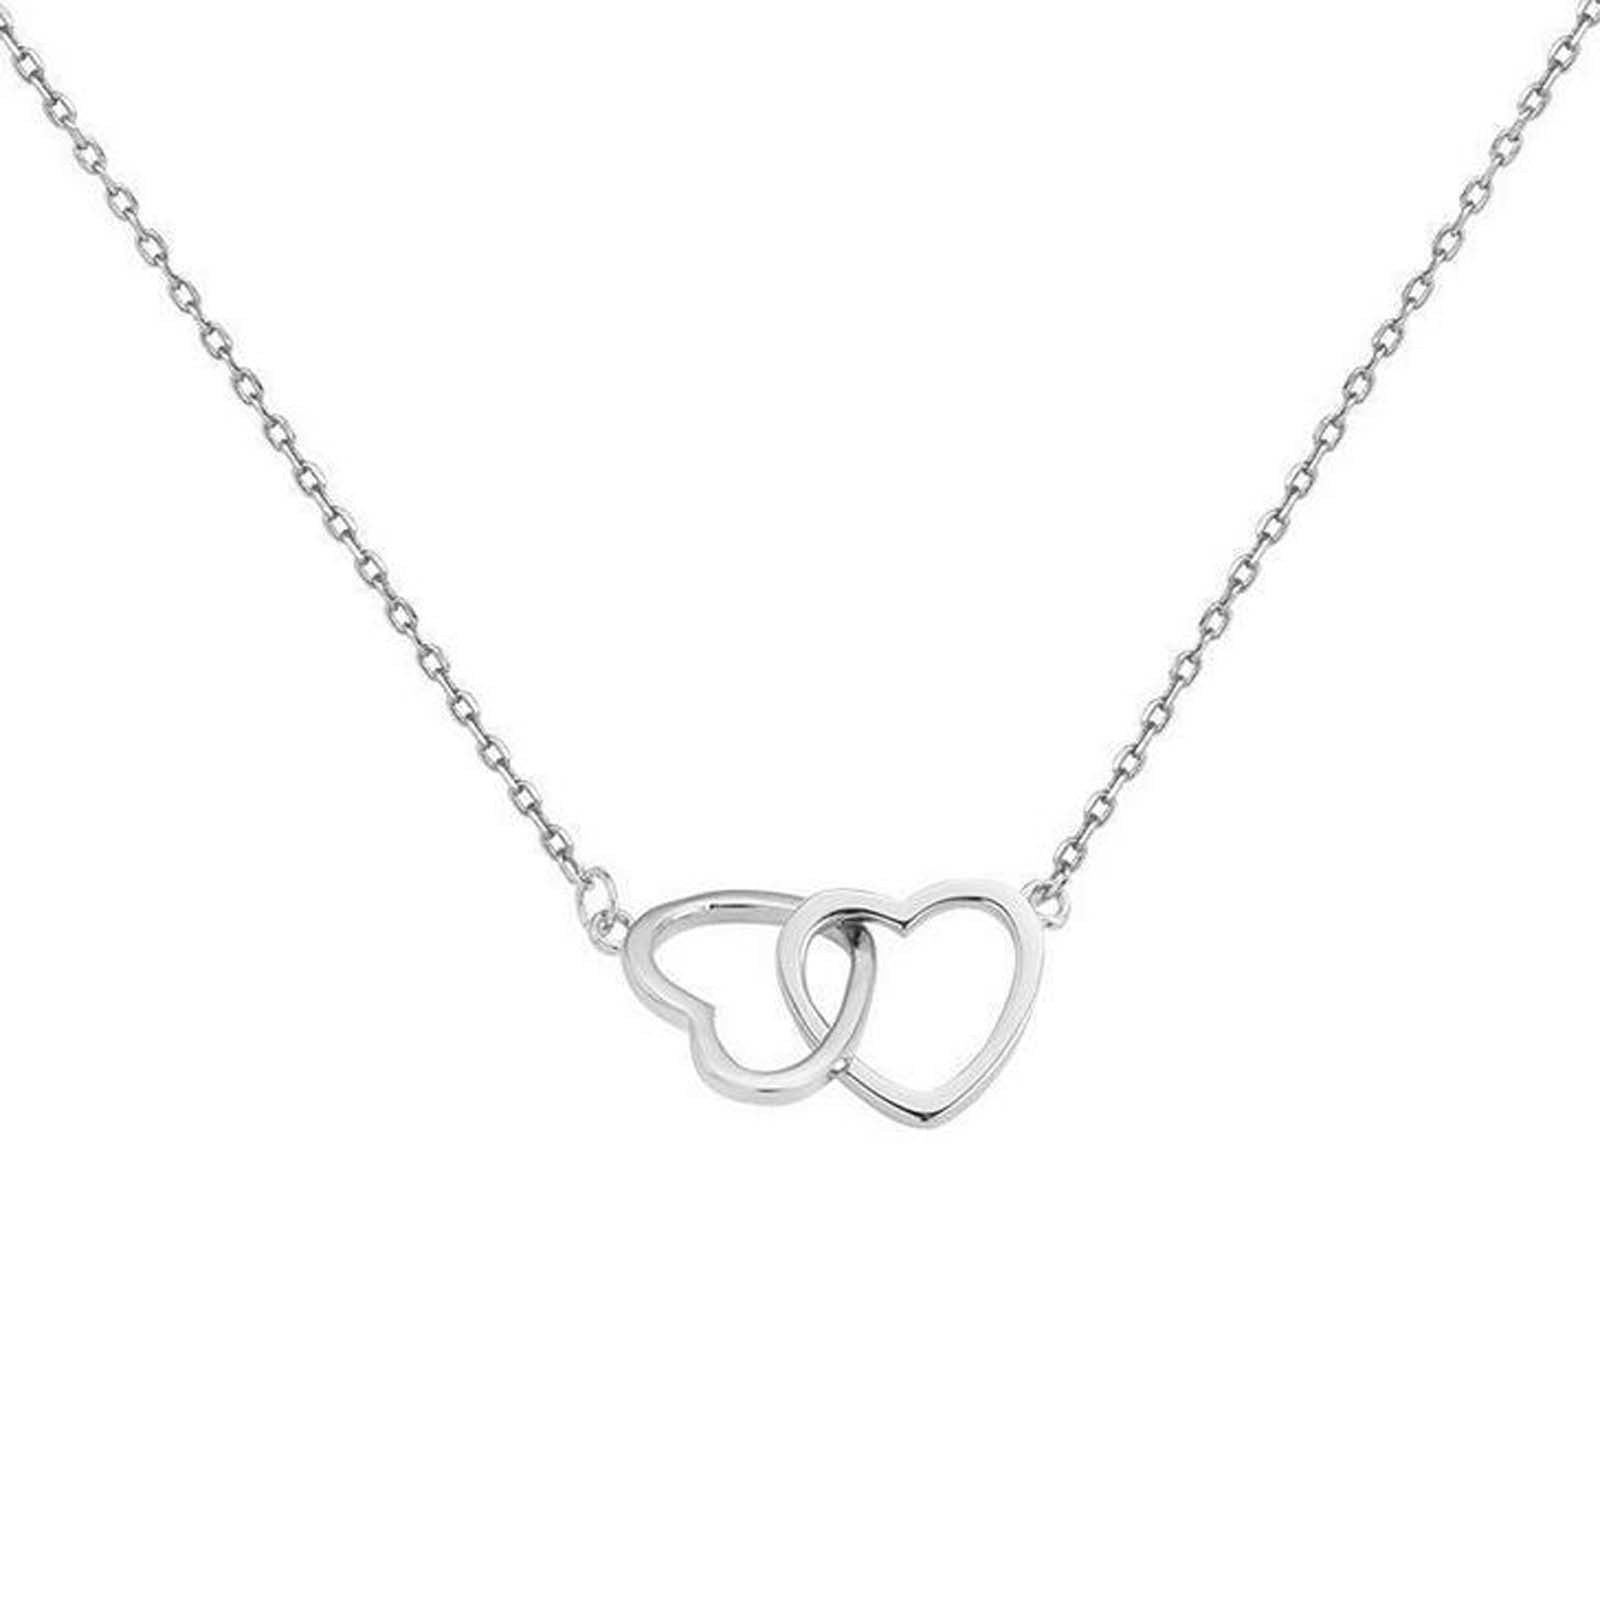 Details about   Two Heart Pendant Necklace 925 Silver by Equilibrium